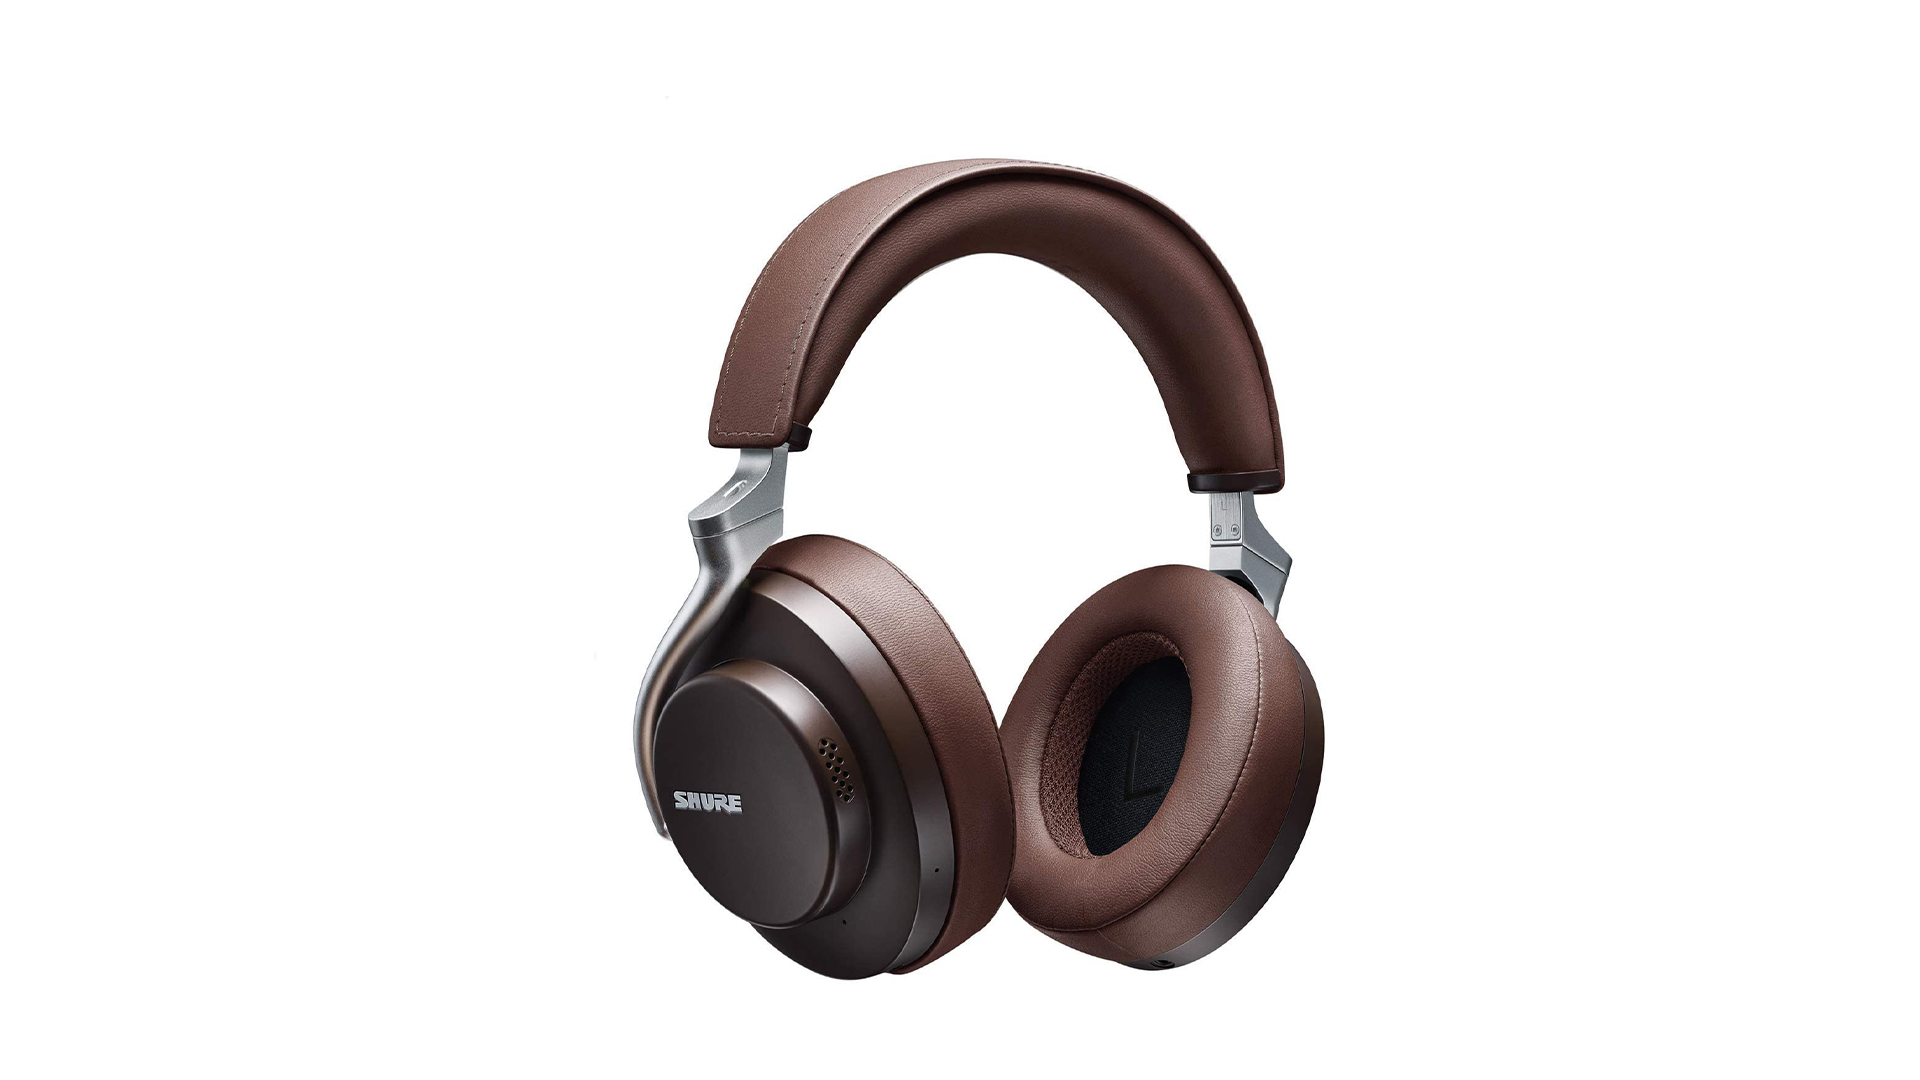 A product render of the Shure AONIC 50 noise cancelling headphones in brown.